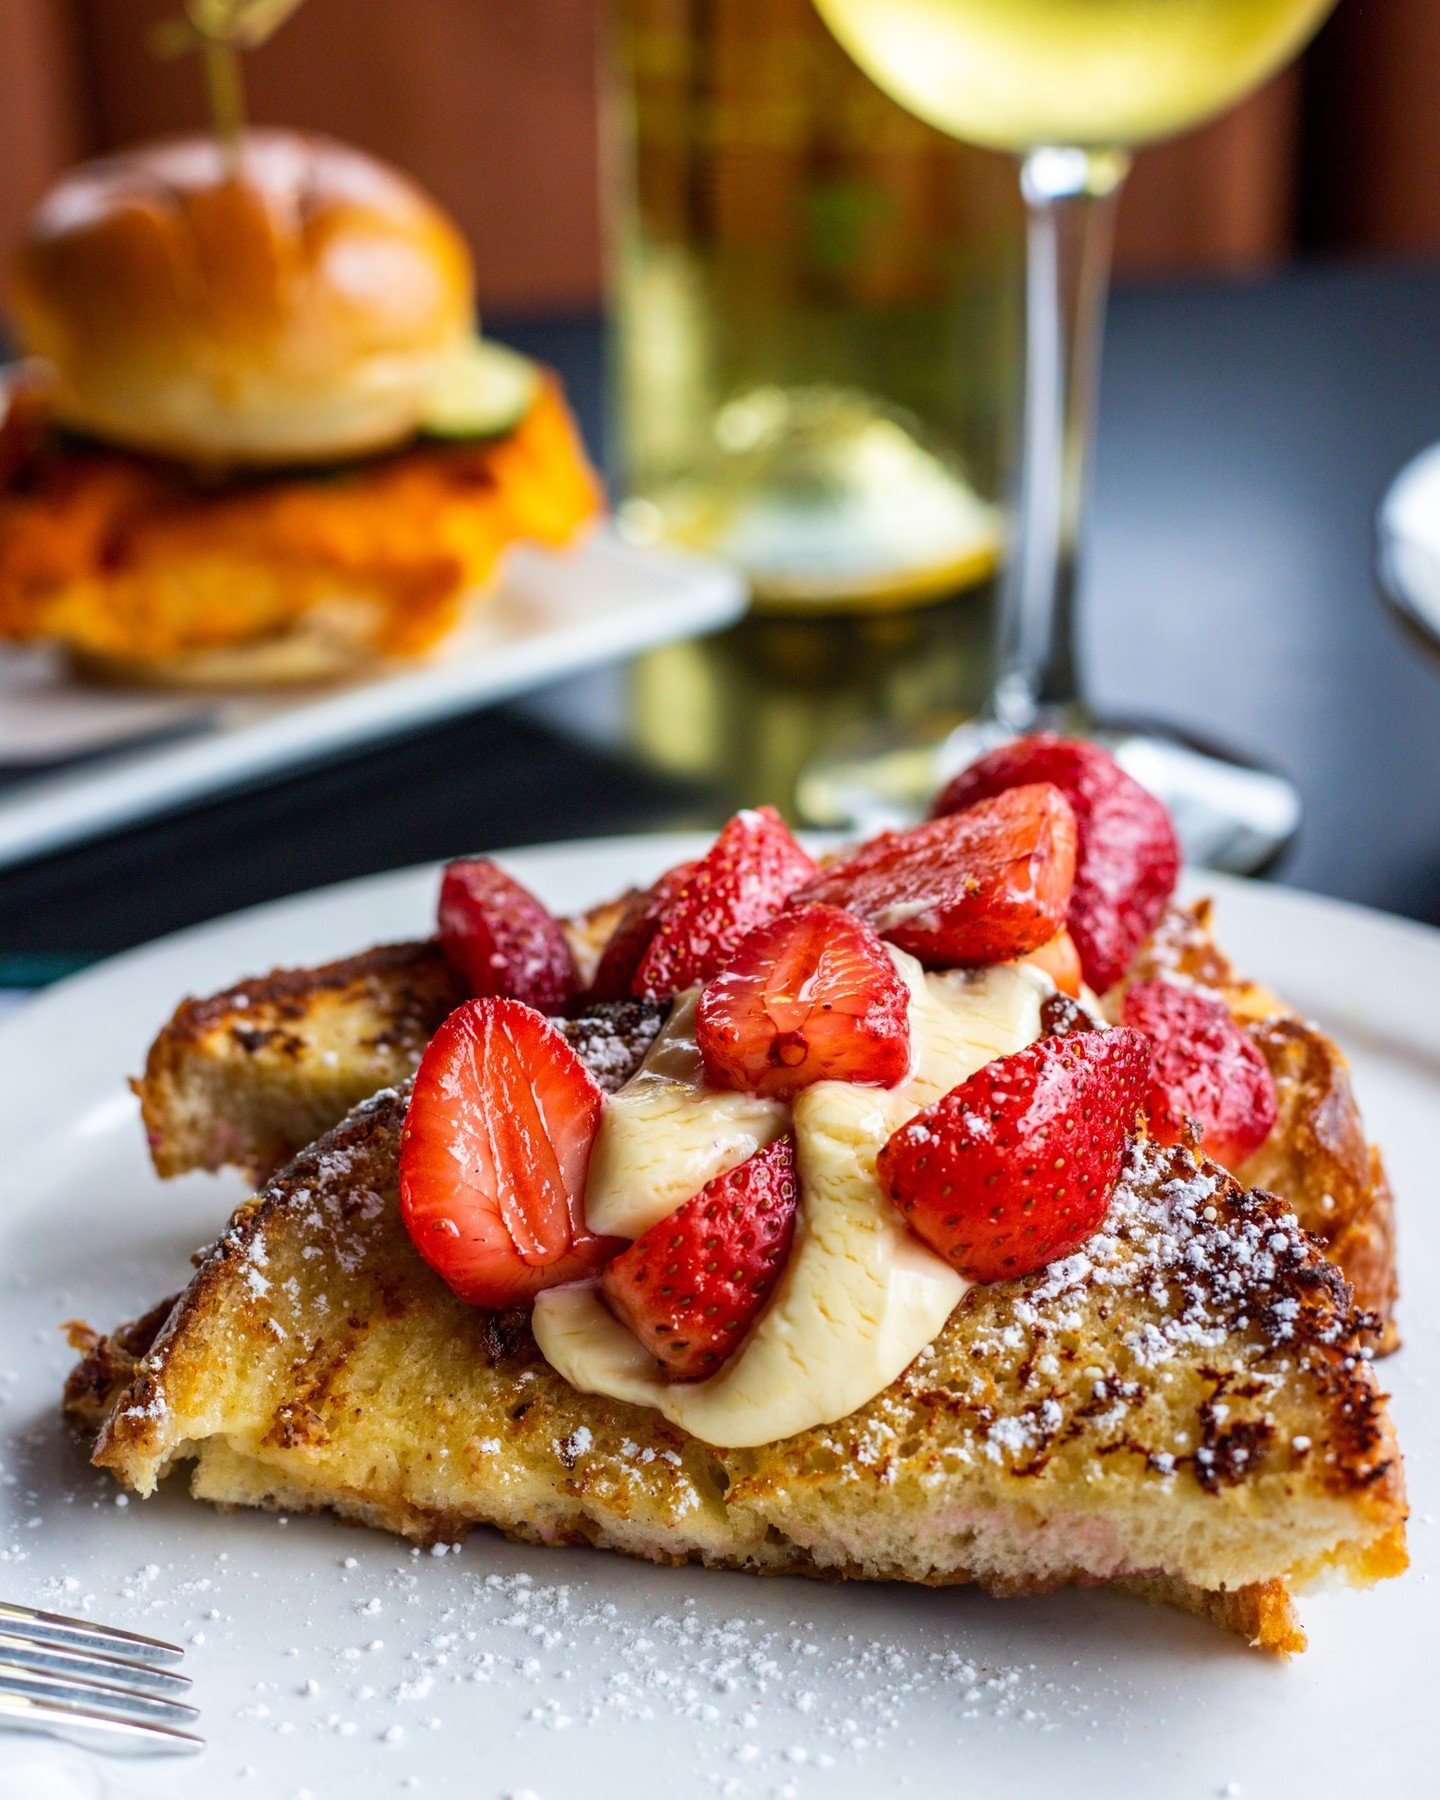 If you can't swing breakfast in bed this Mother's Day &mdash; swing by for All Day Breakfast at 24 Diner! 🥂🍓✨

#AustinFoodie #24Diner #AustinEater #365ThingsAustin #AtxBrunch #DowntownAustin #AustinBreakfast #MothersDayBreakfast #Austinites